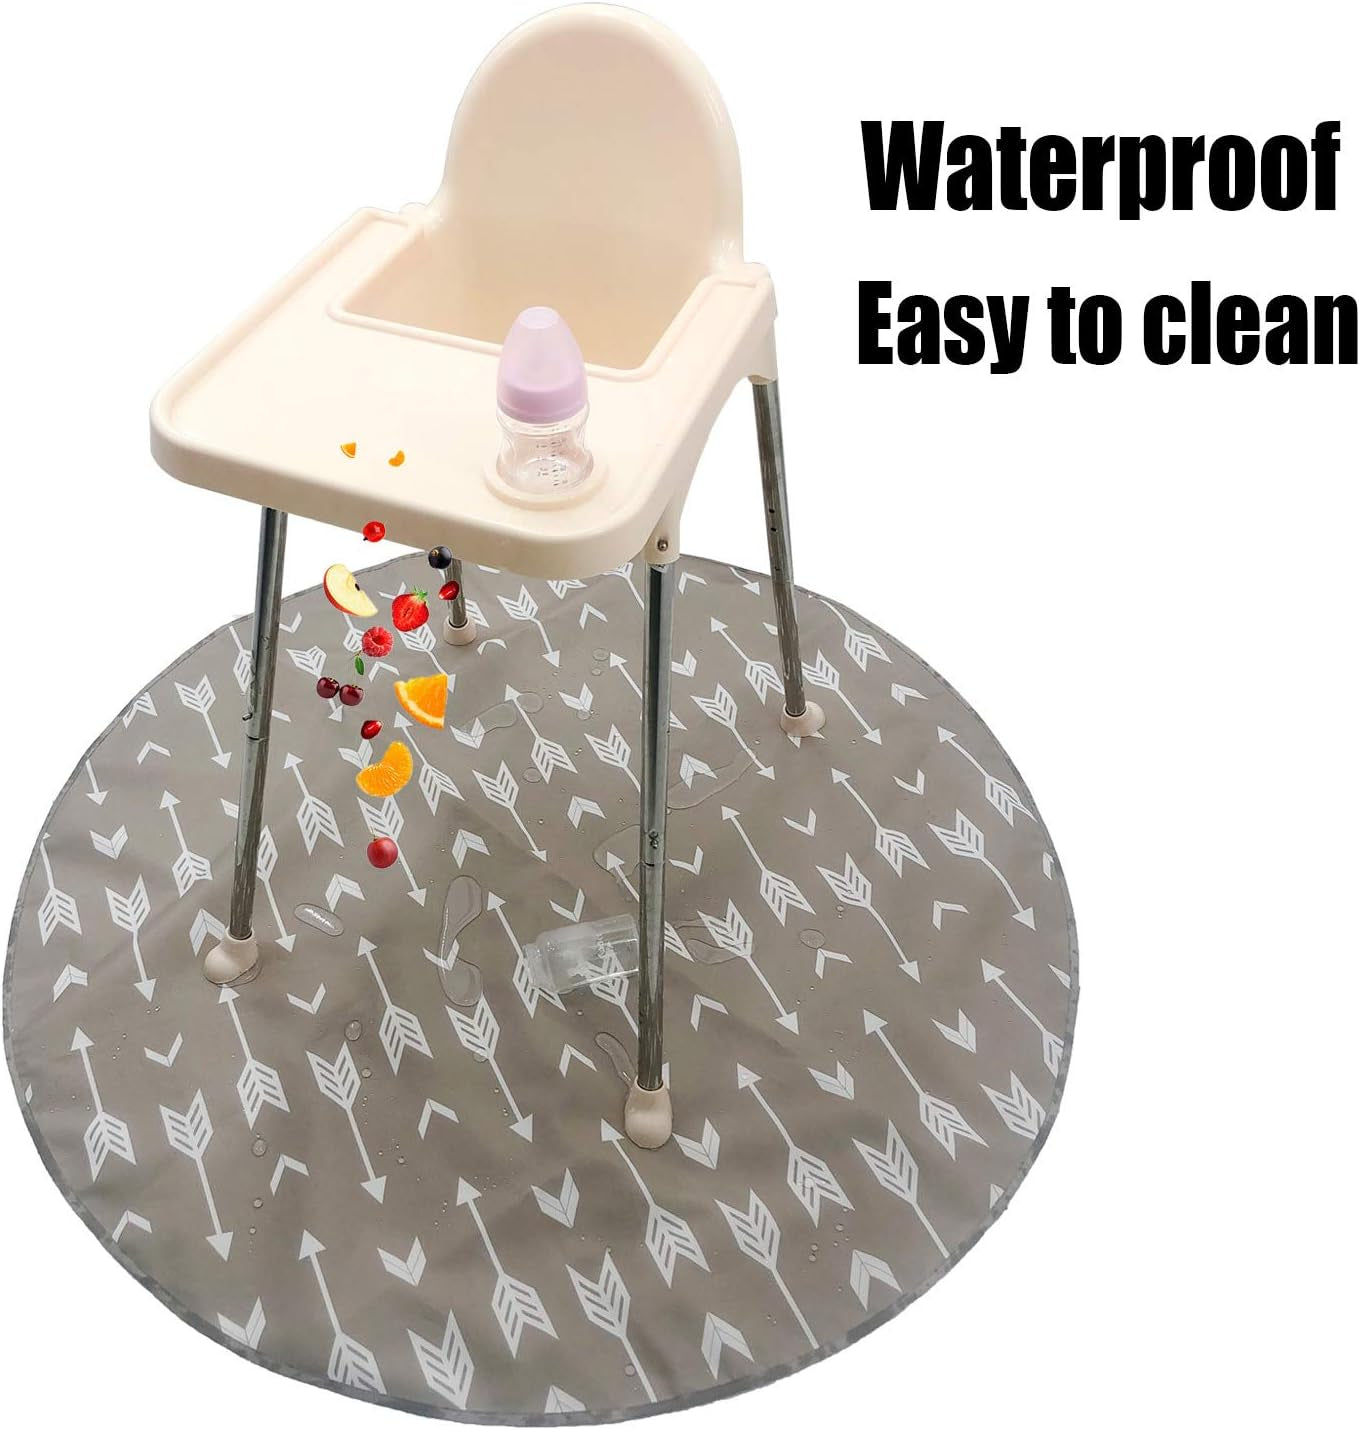 "Ultimate 51" Waterproof Baby Splat Mat - Versatile, Portable, and Stylish - Perfect for High Chairs, Playtime, and Messy Meals (Beige Arrow Design)"